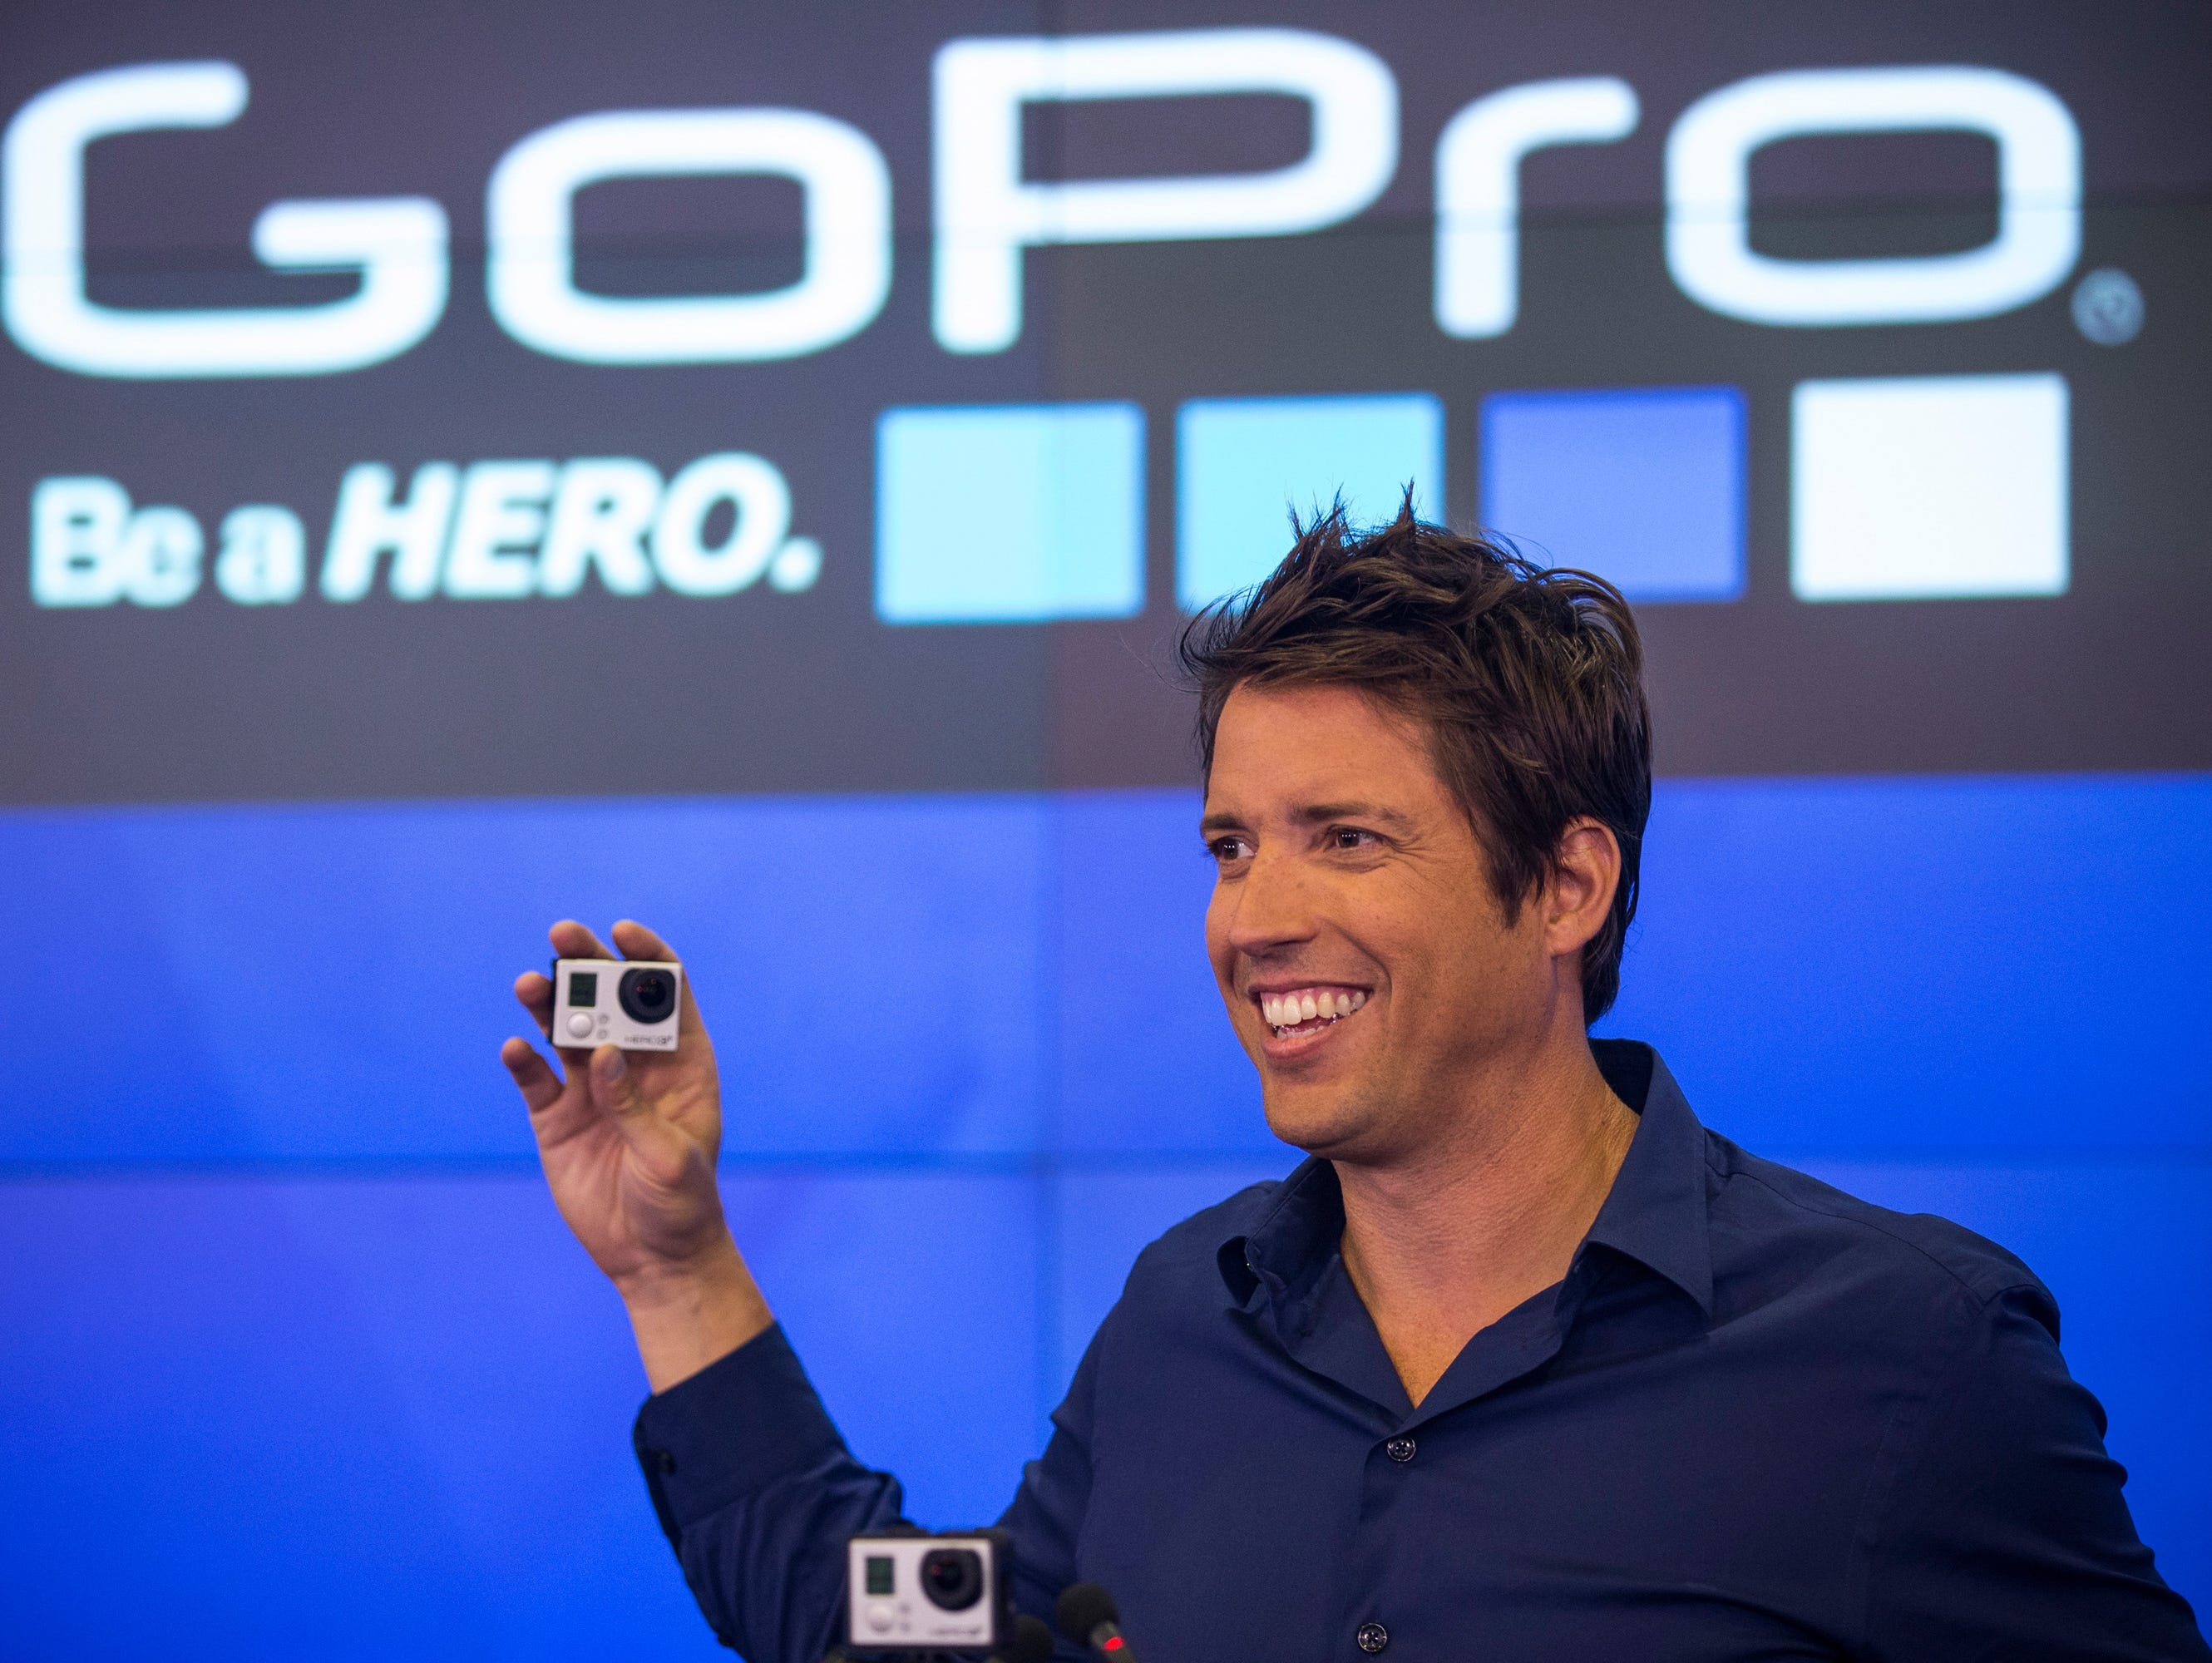 Nick Woodman, founder and CEO of GoPro speaks during the company's initial public offering at the Nasdaq Stock Exchange on June 26, 2014 in New York City.